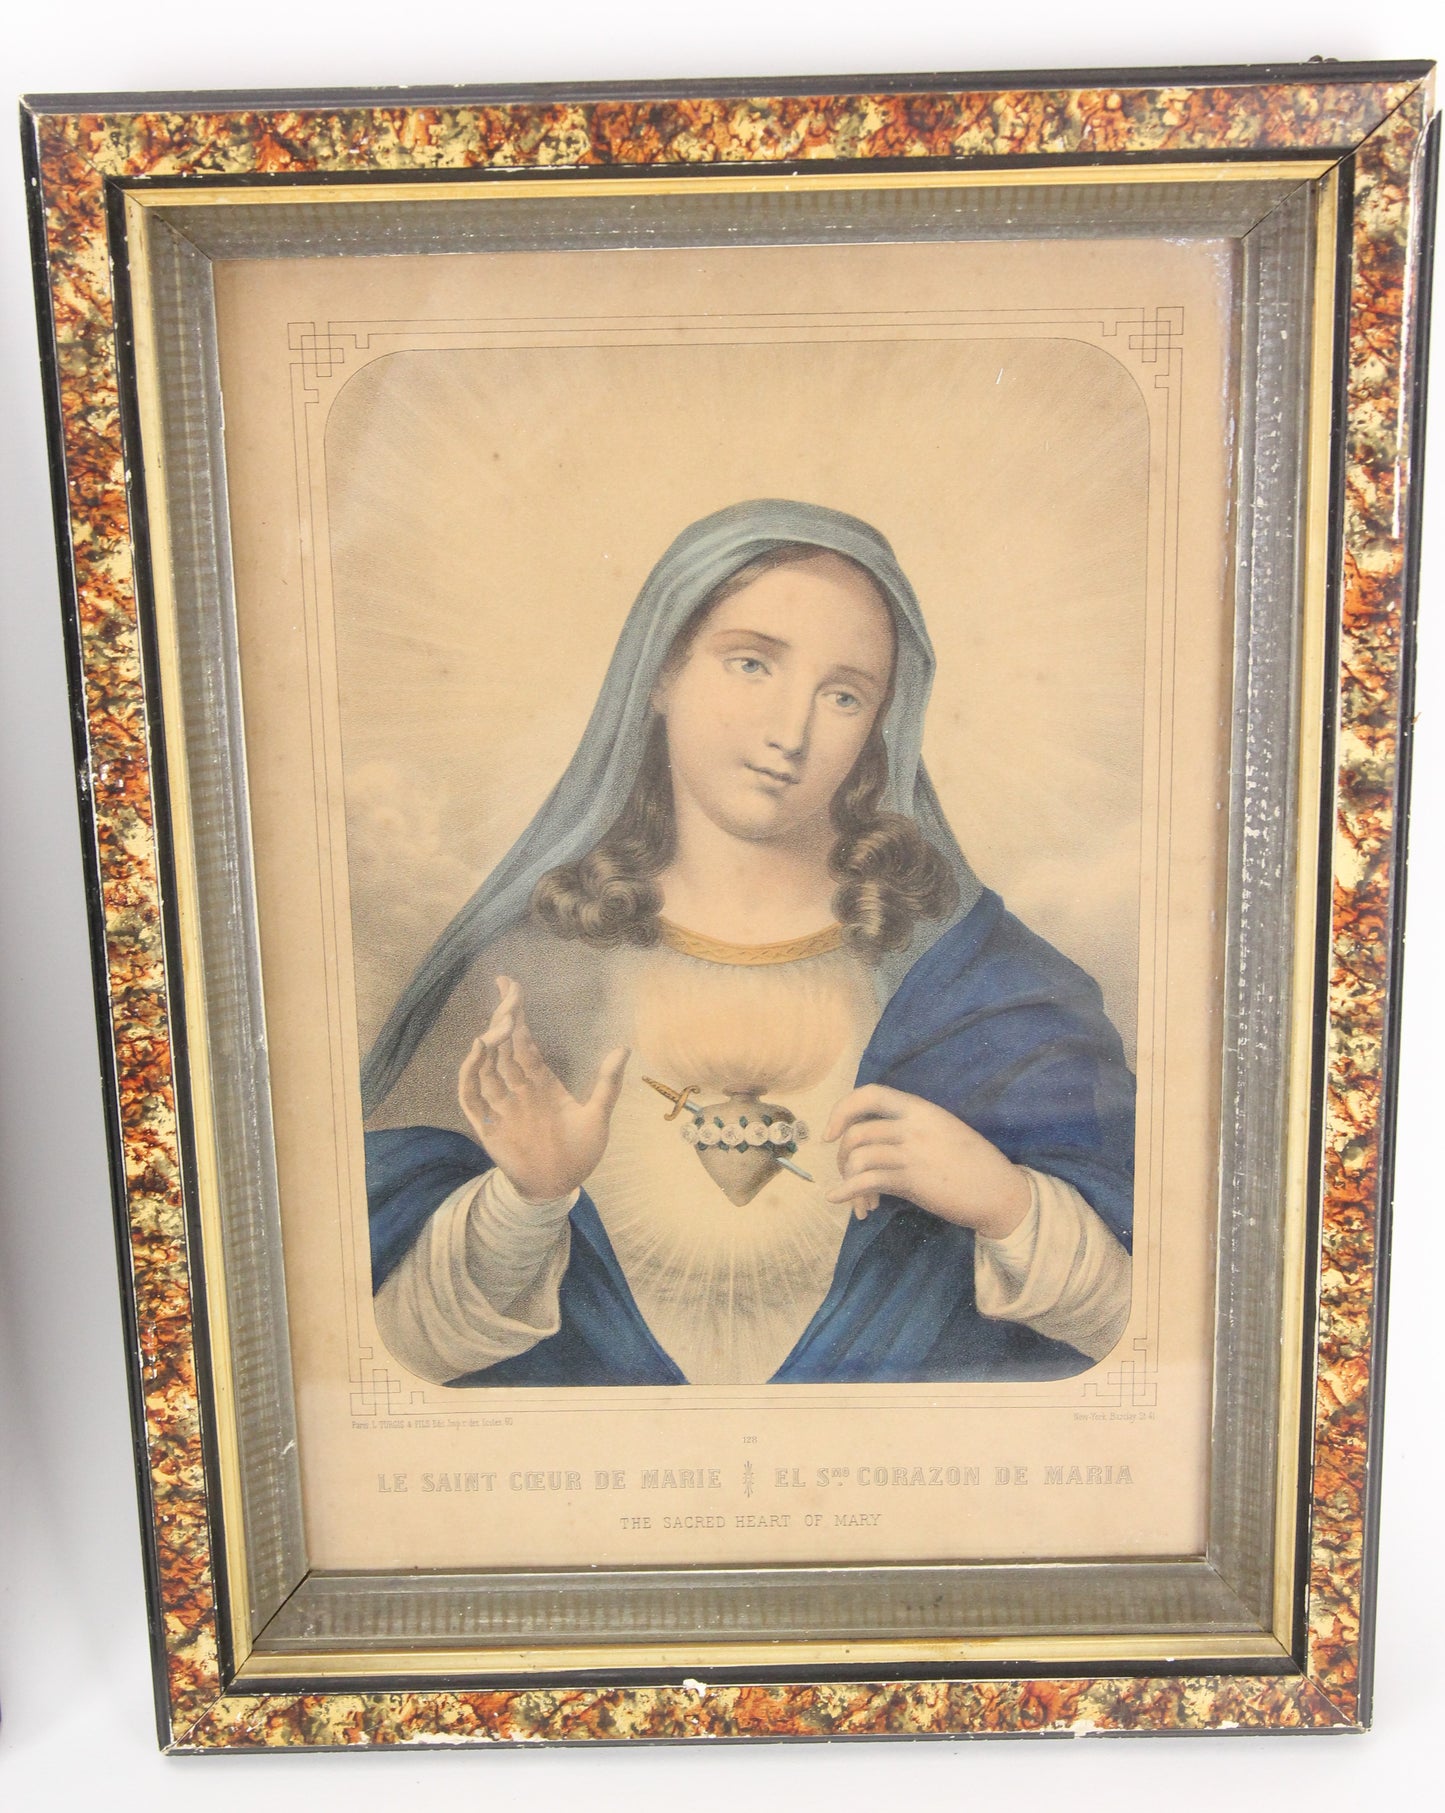 Jesus and Mary Sacred Heart Lithographs by L. Turgis & Fils, Paris, Framed Pair